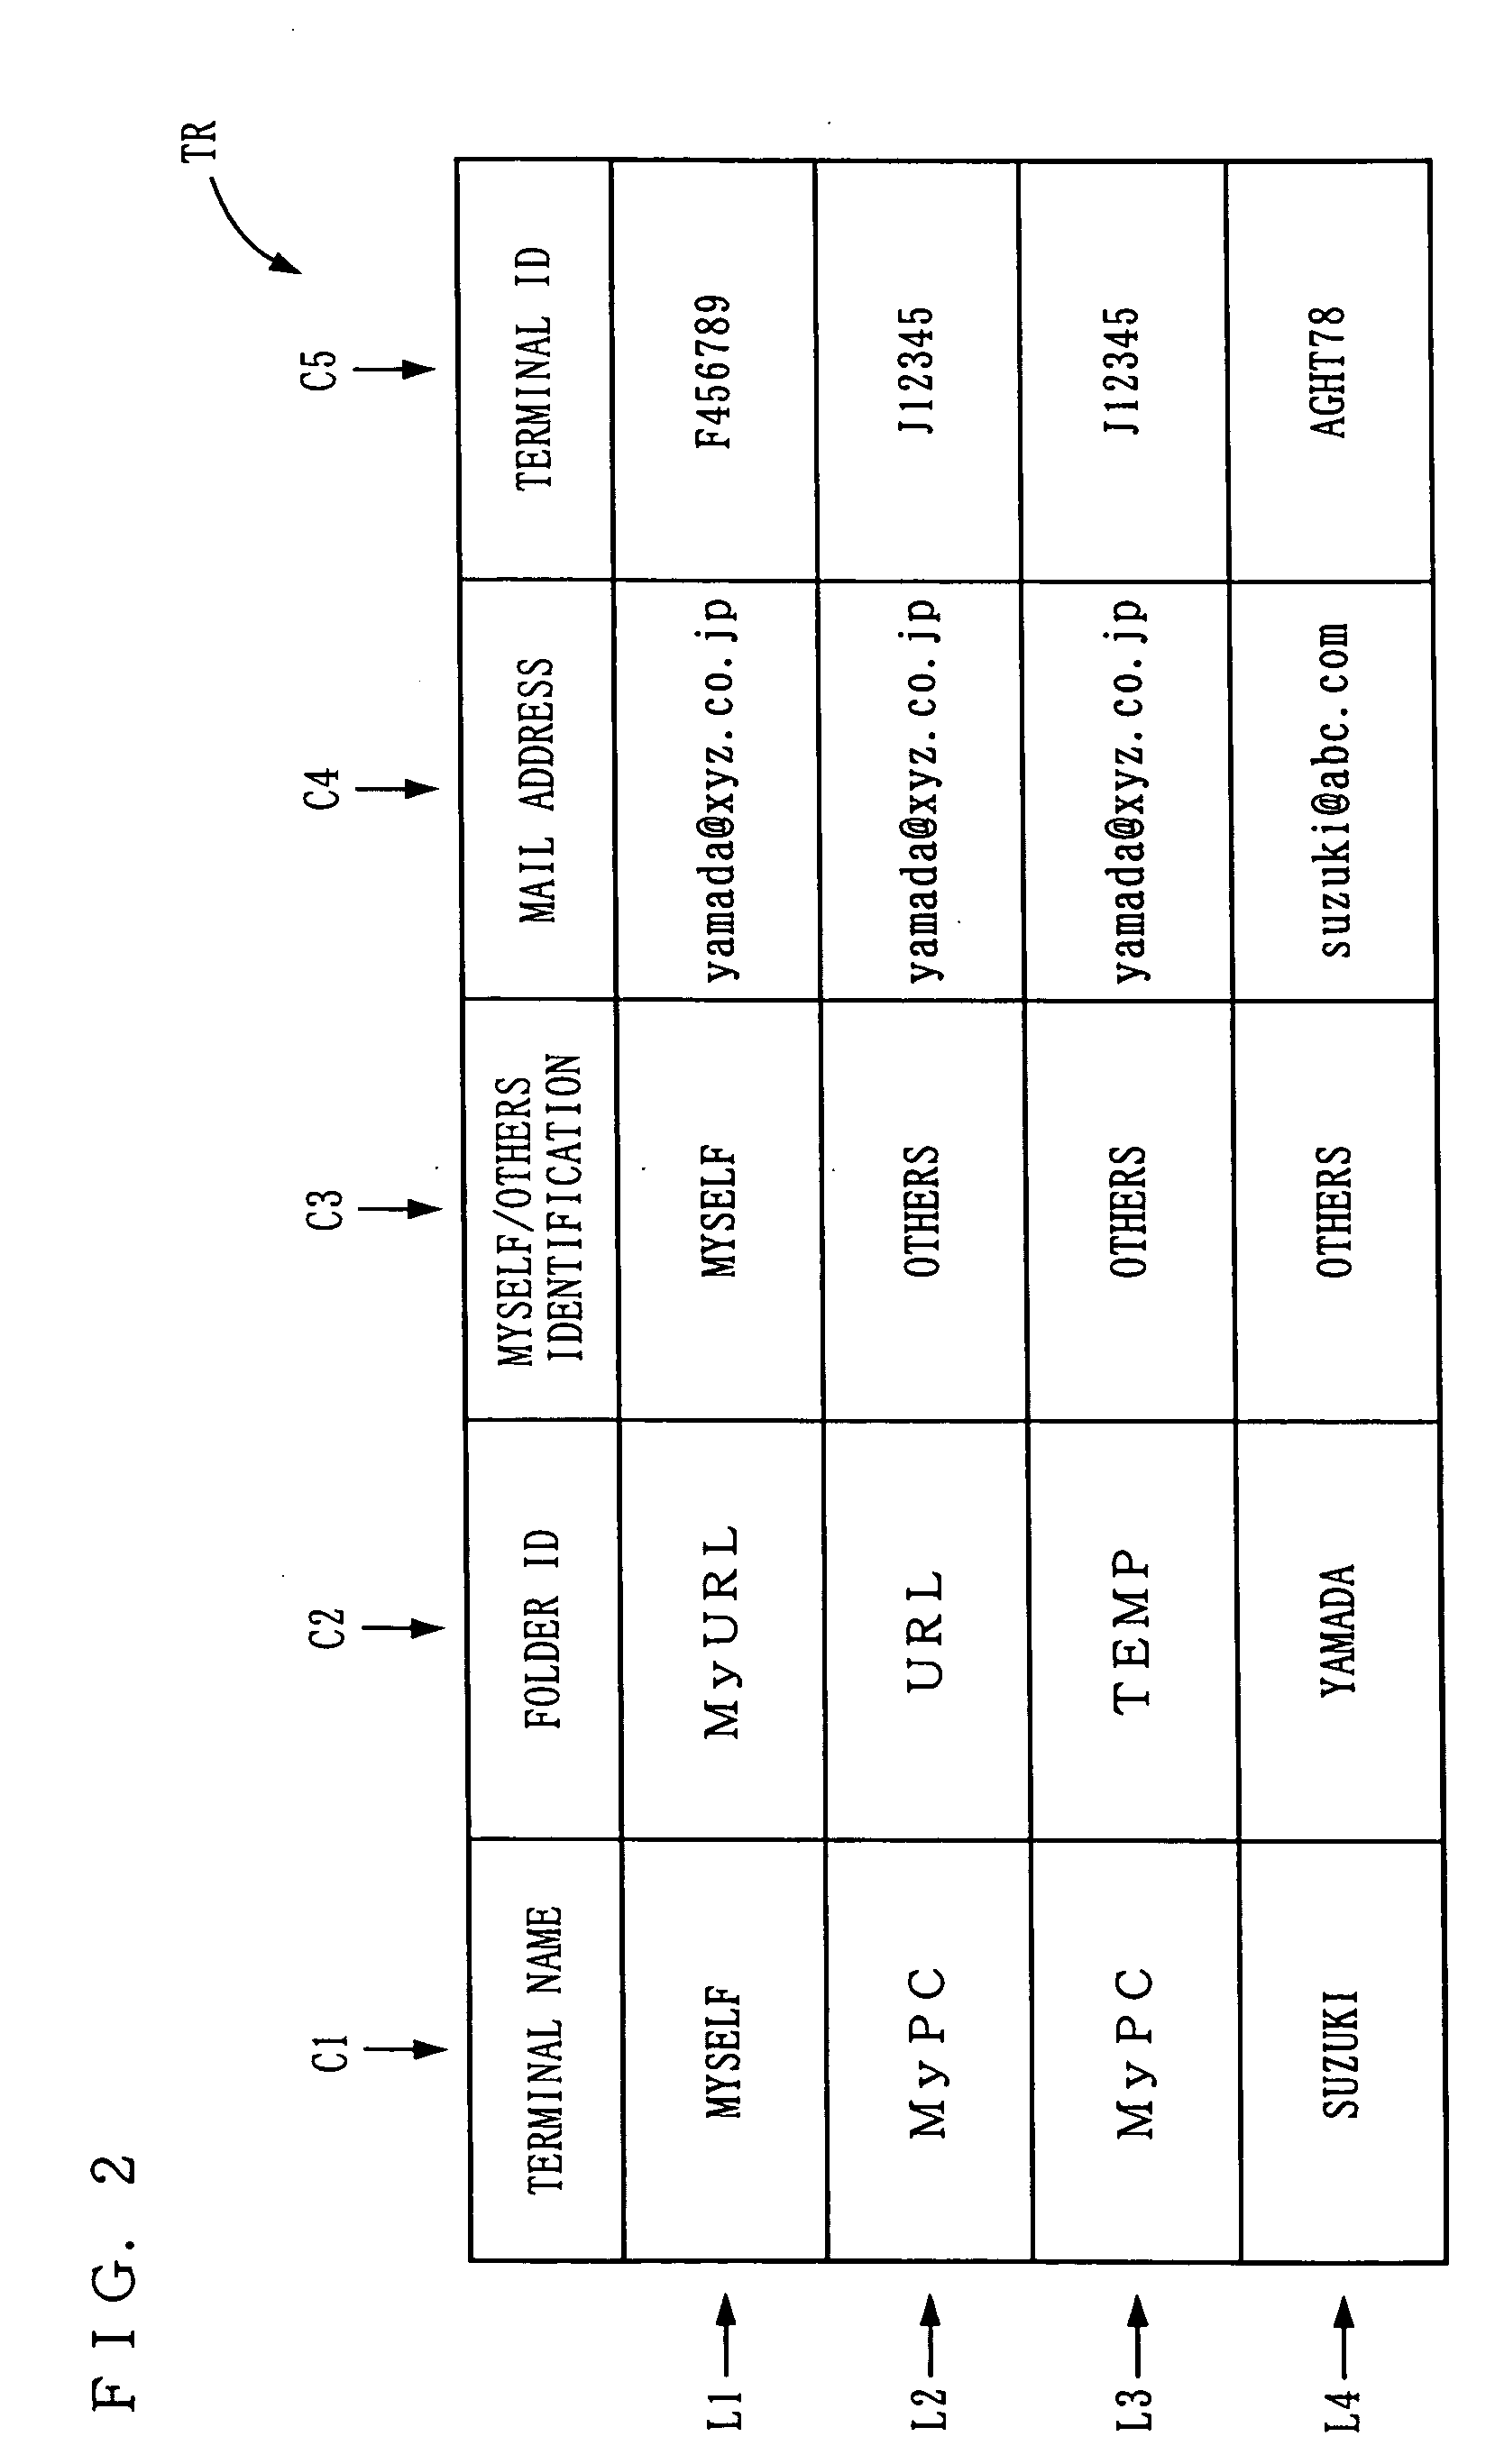 Information acquiring device and information providing device